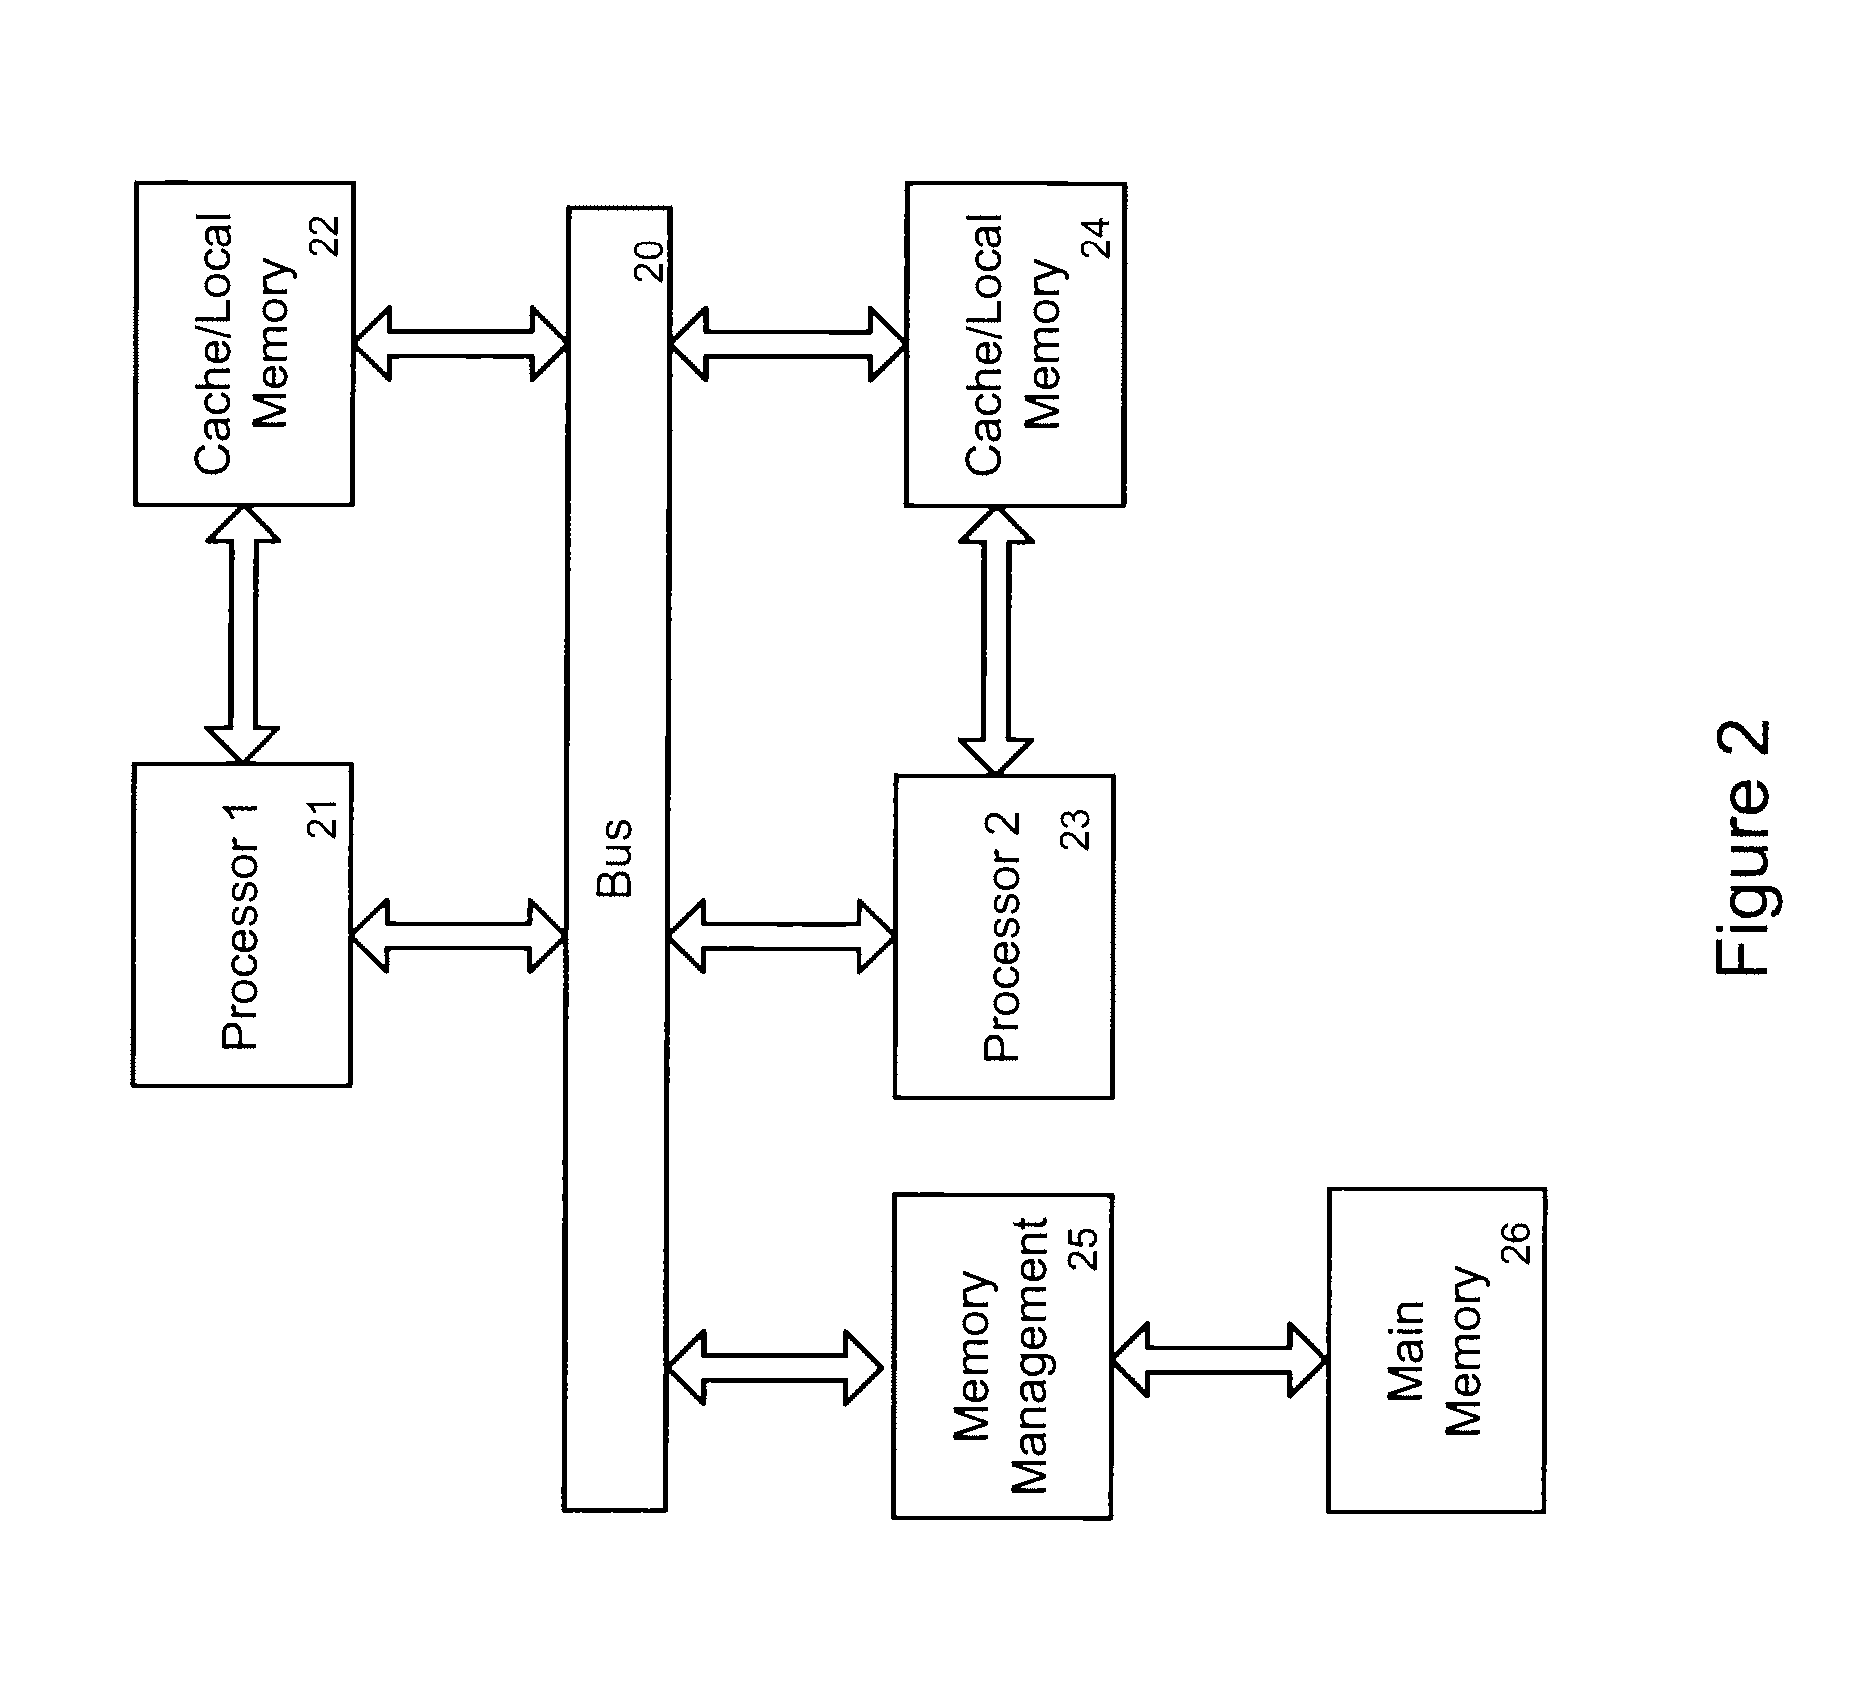 Systems and methods for asymmetric multiprocessing